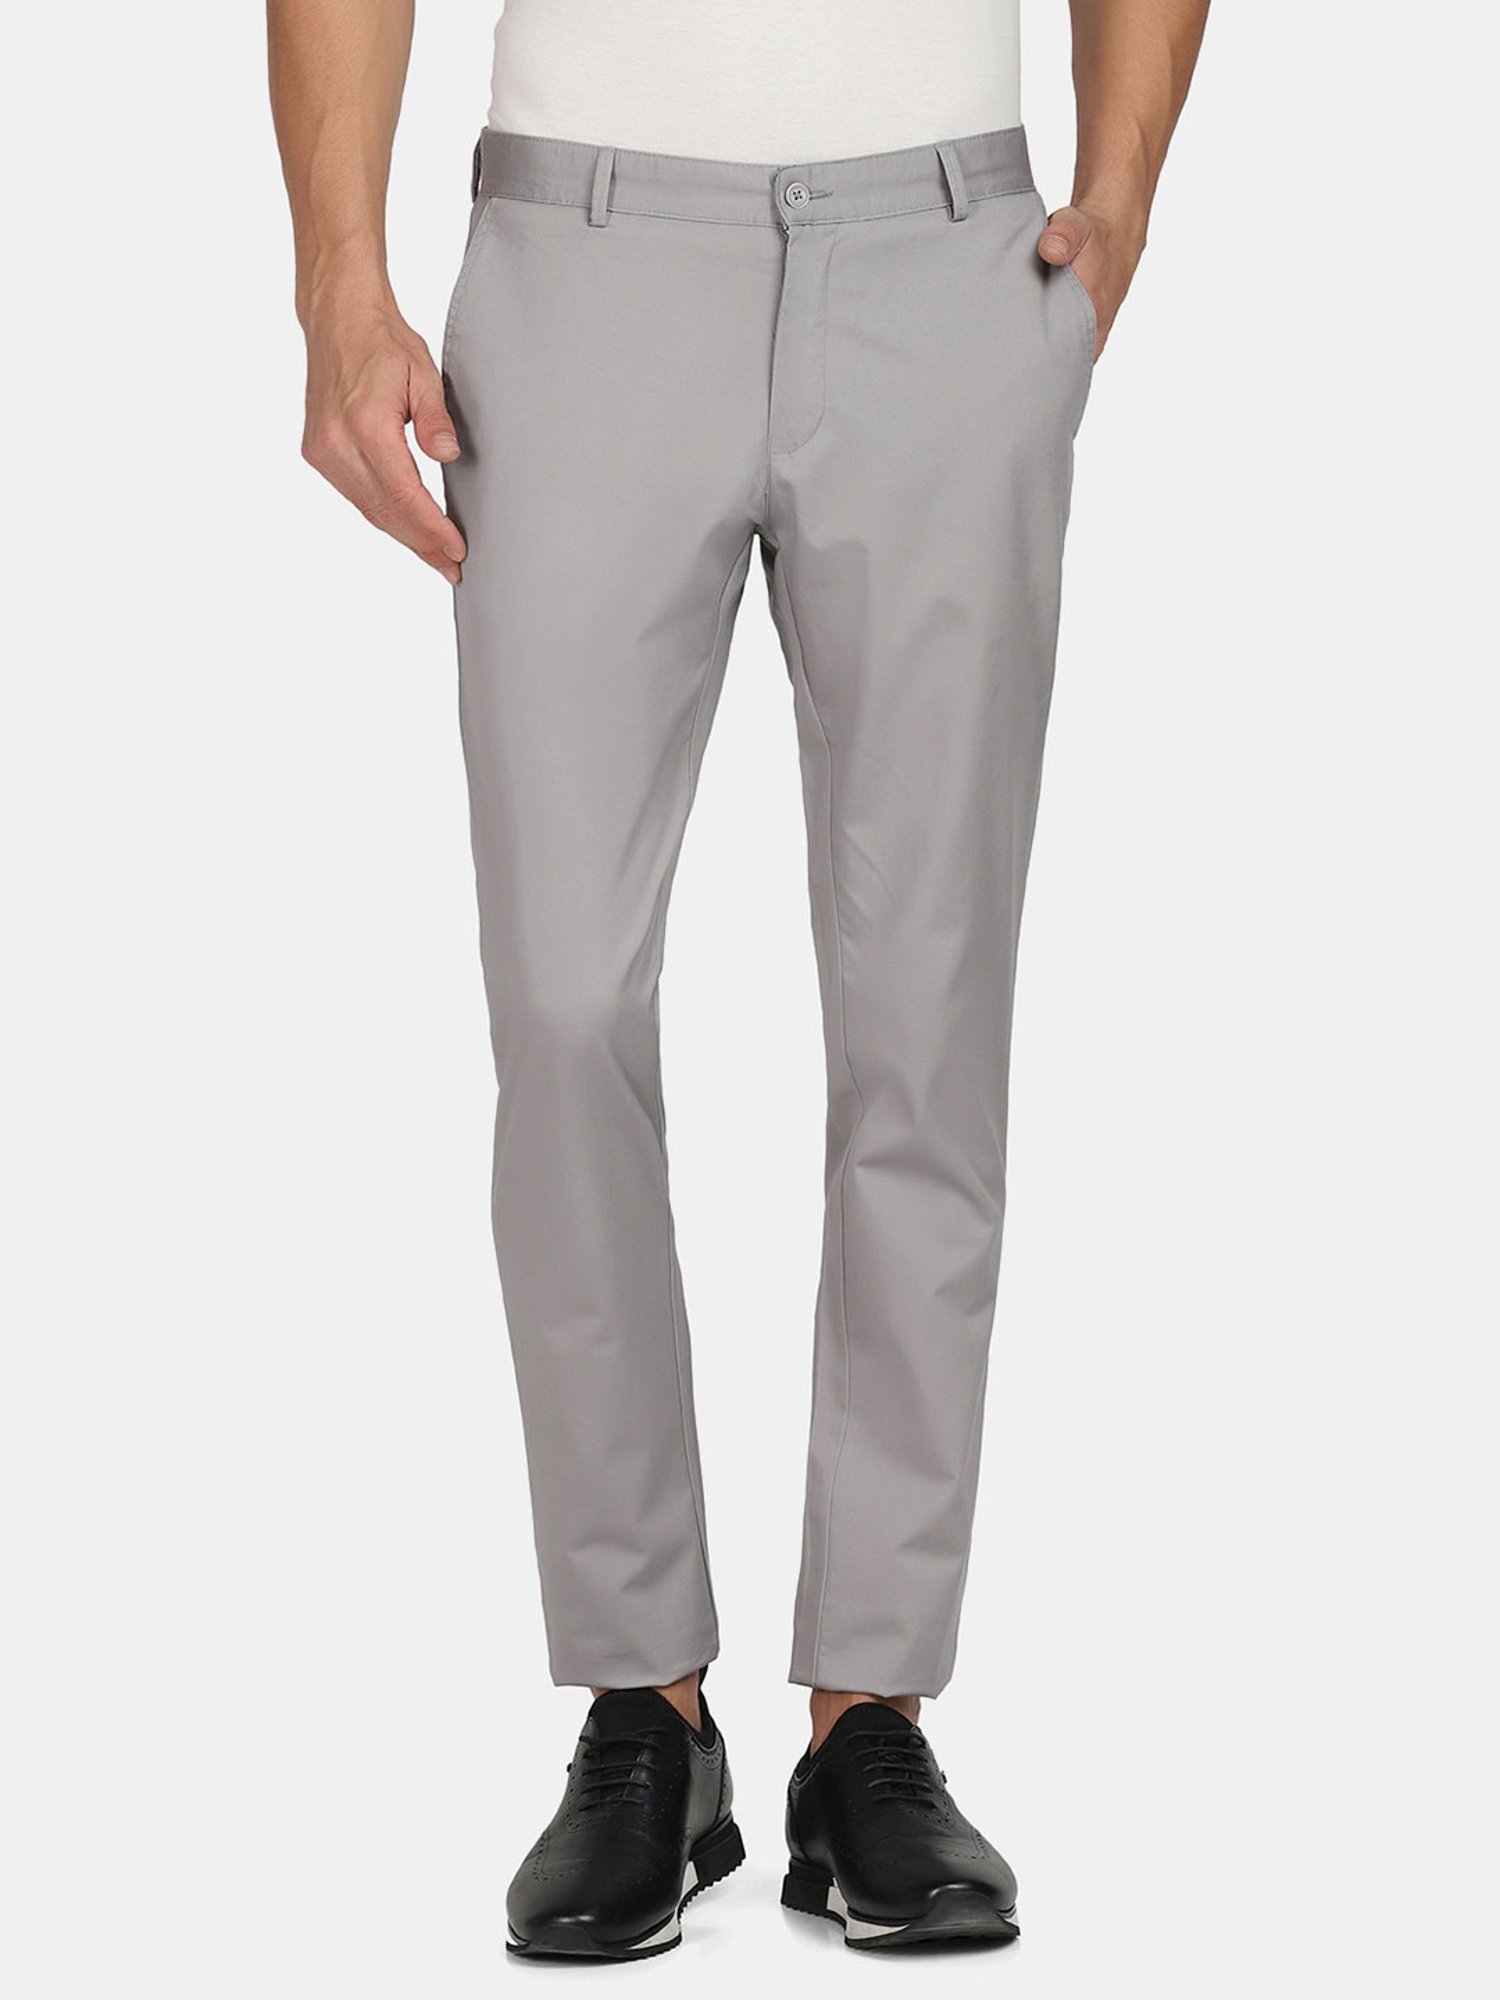 Grey Check Skinny Suit Trousers  New Look